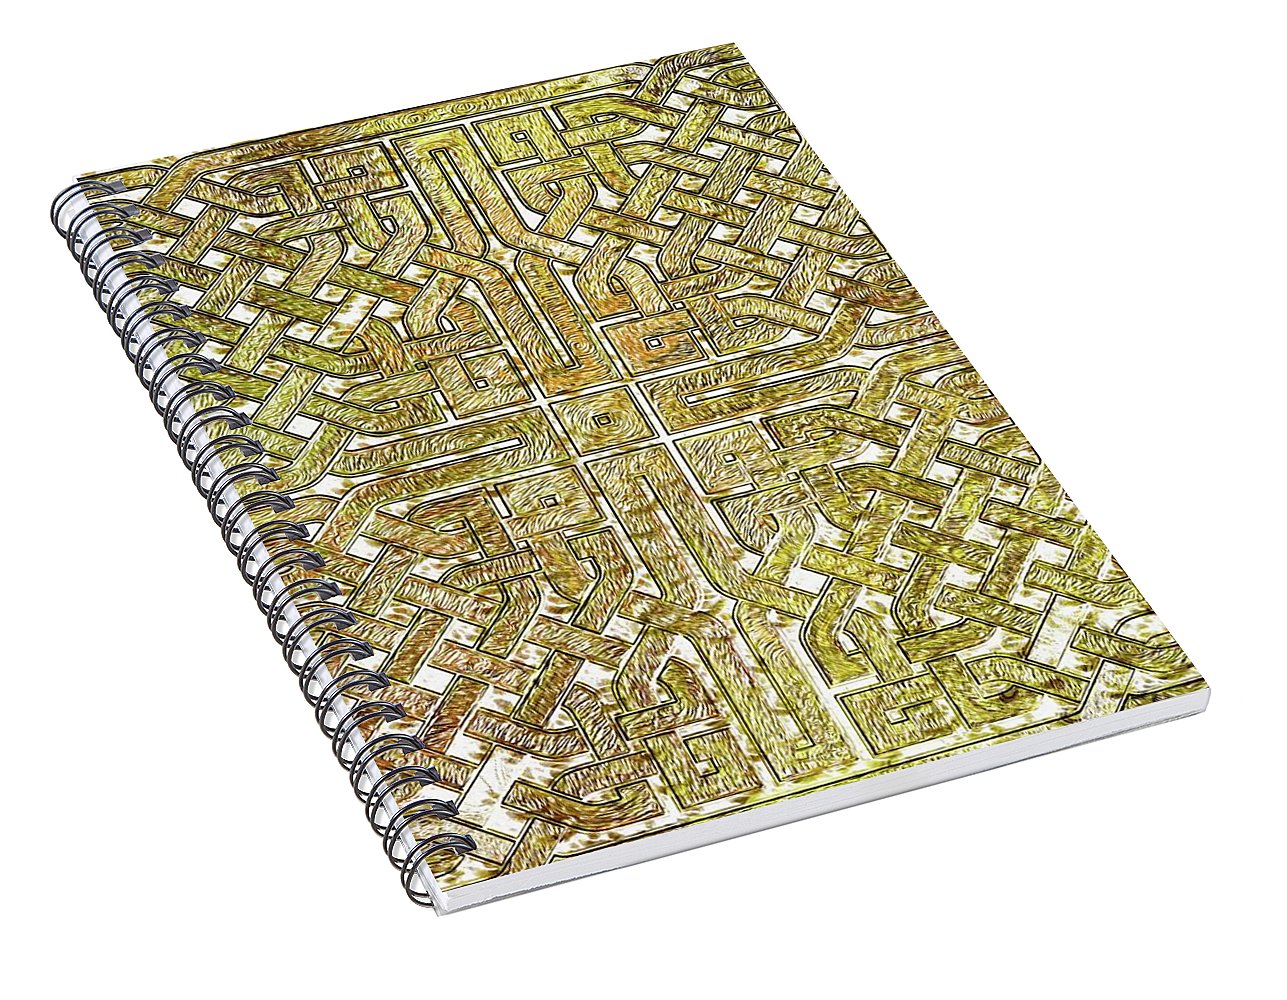 Gold Celtic Knot Square - Spiral Notebook